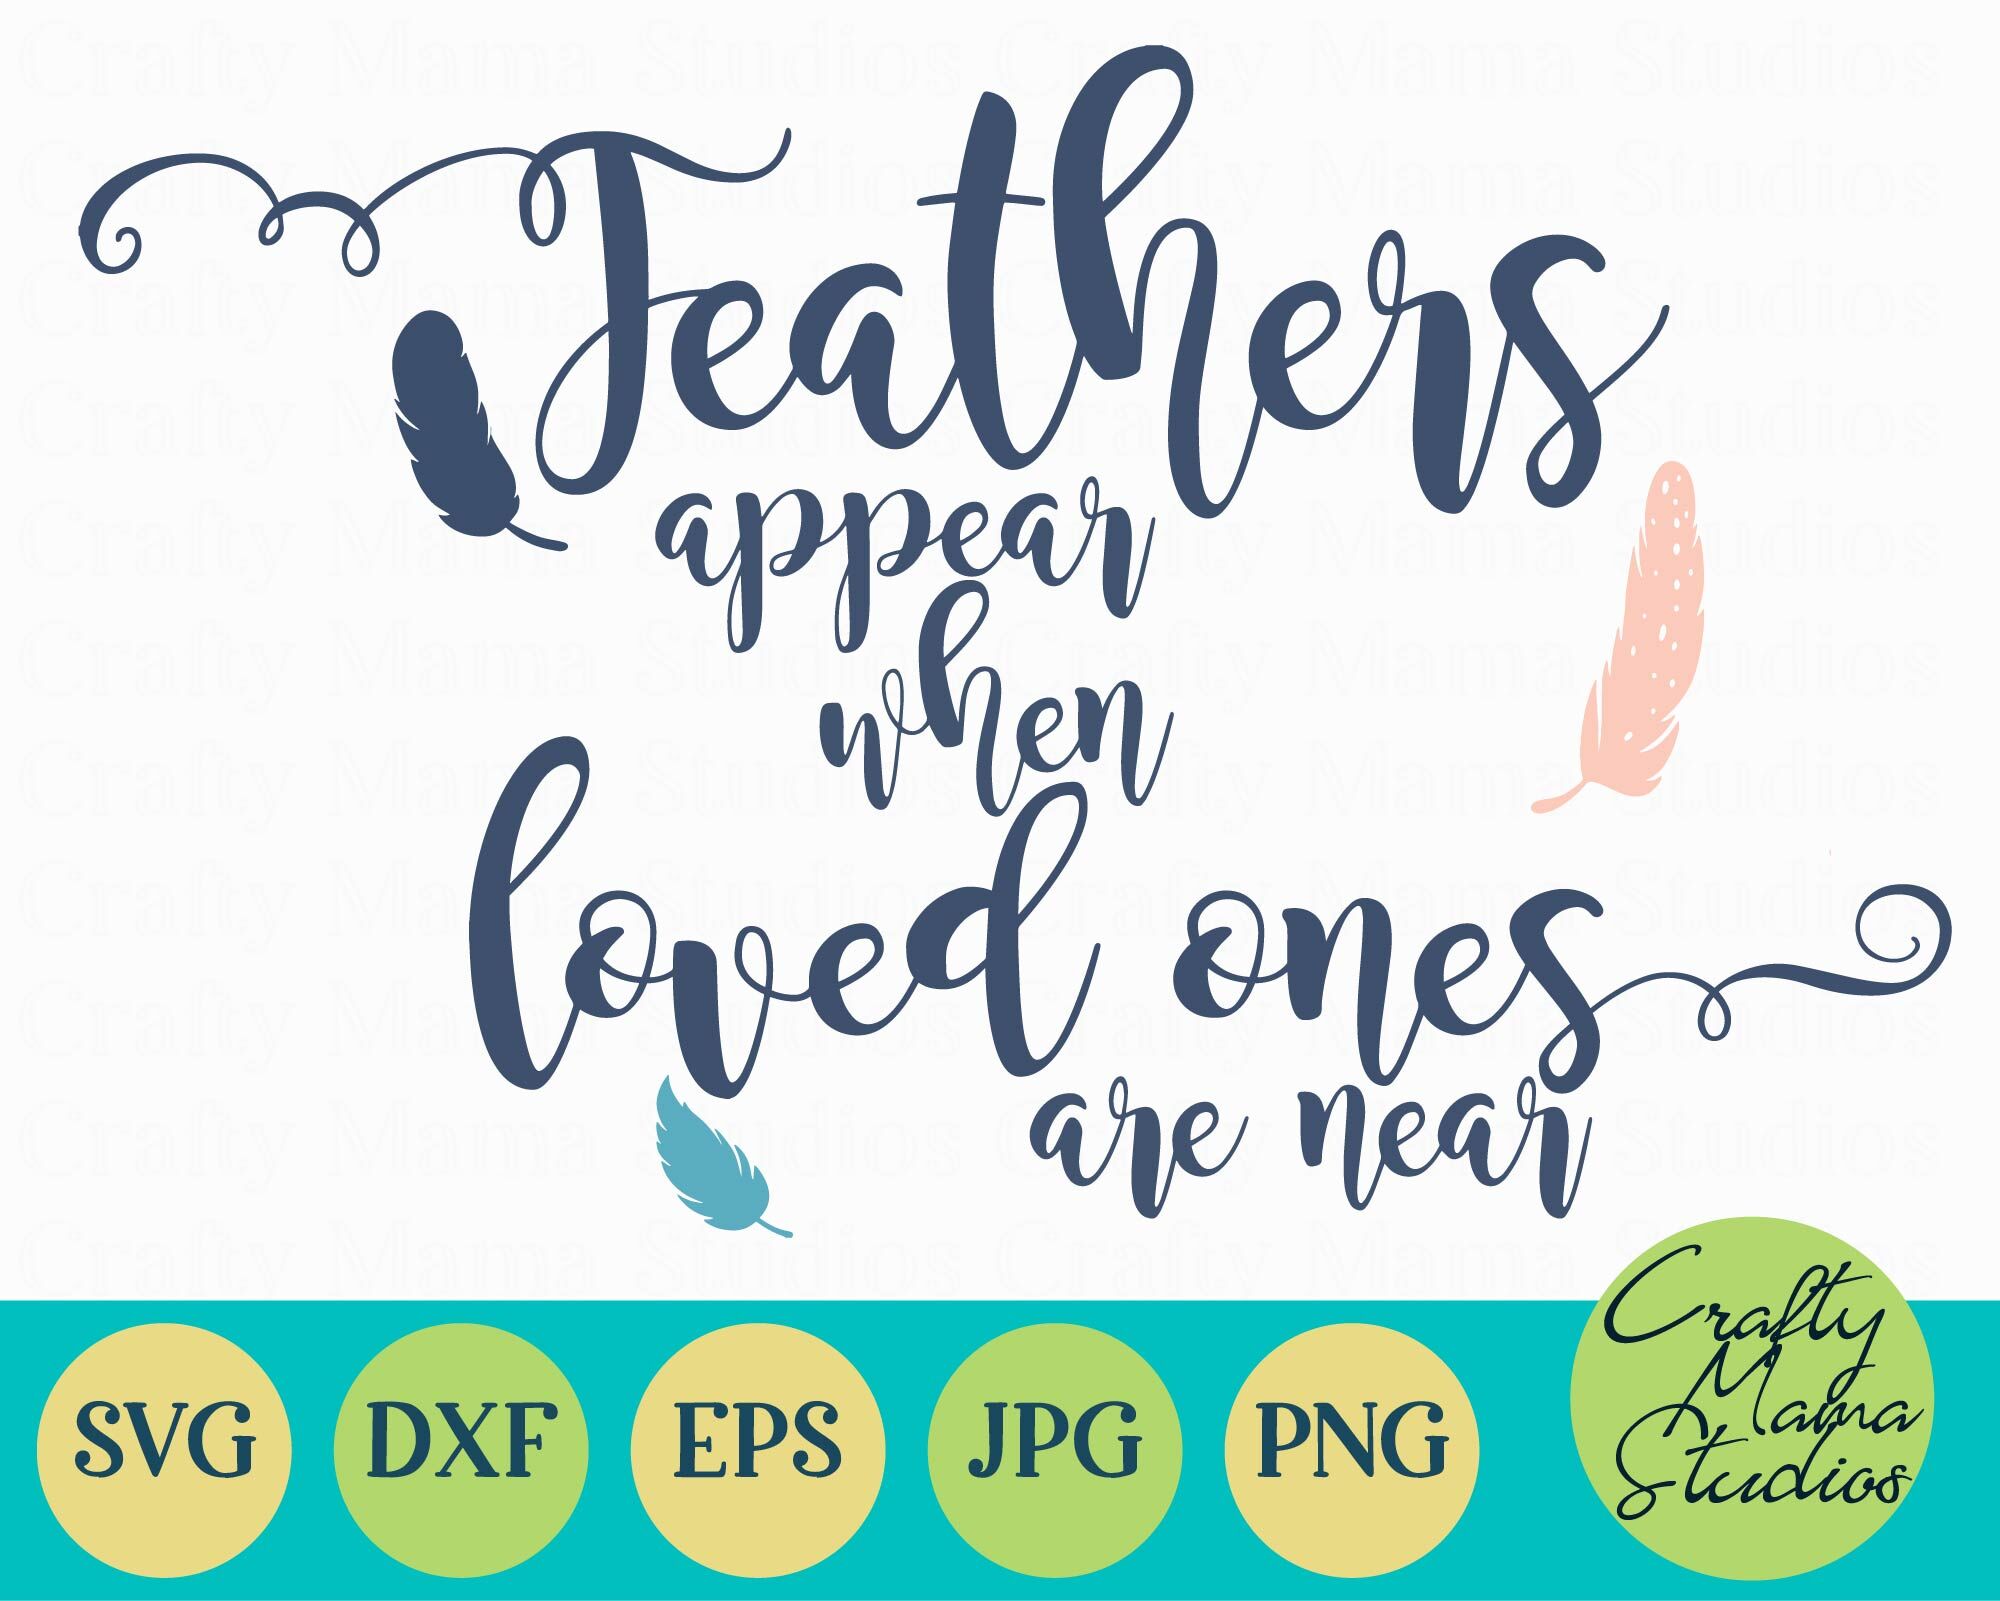 Feathers appear when loved ones are near wall art vinyl decal sticker 